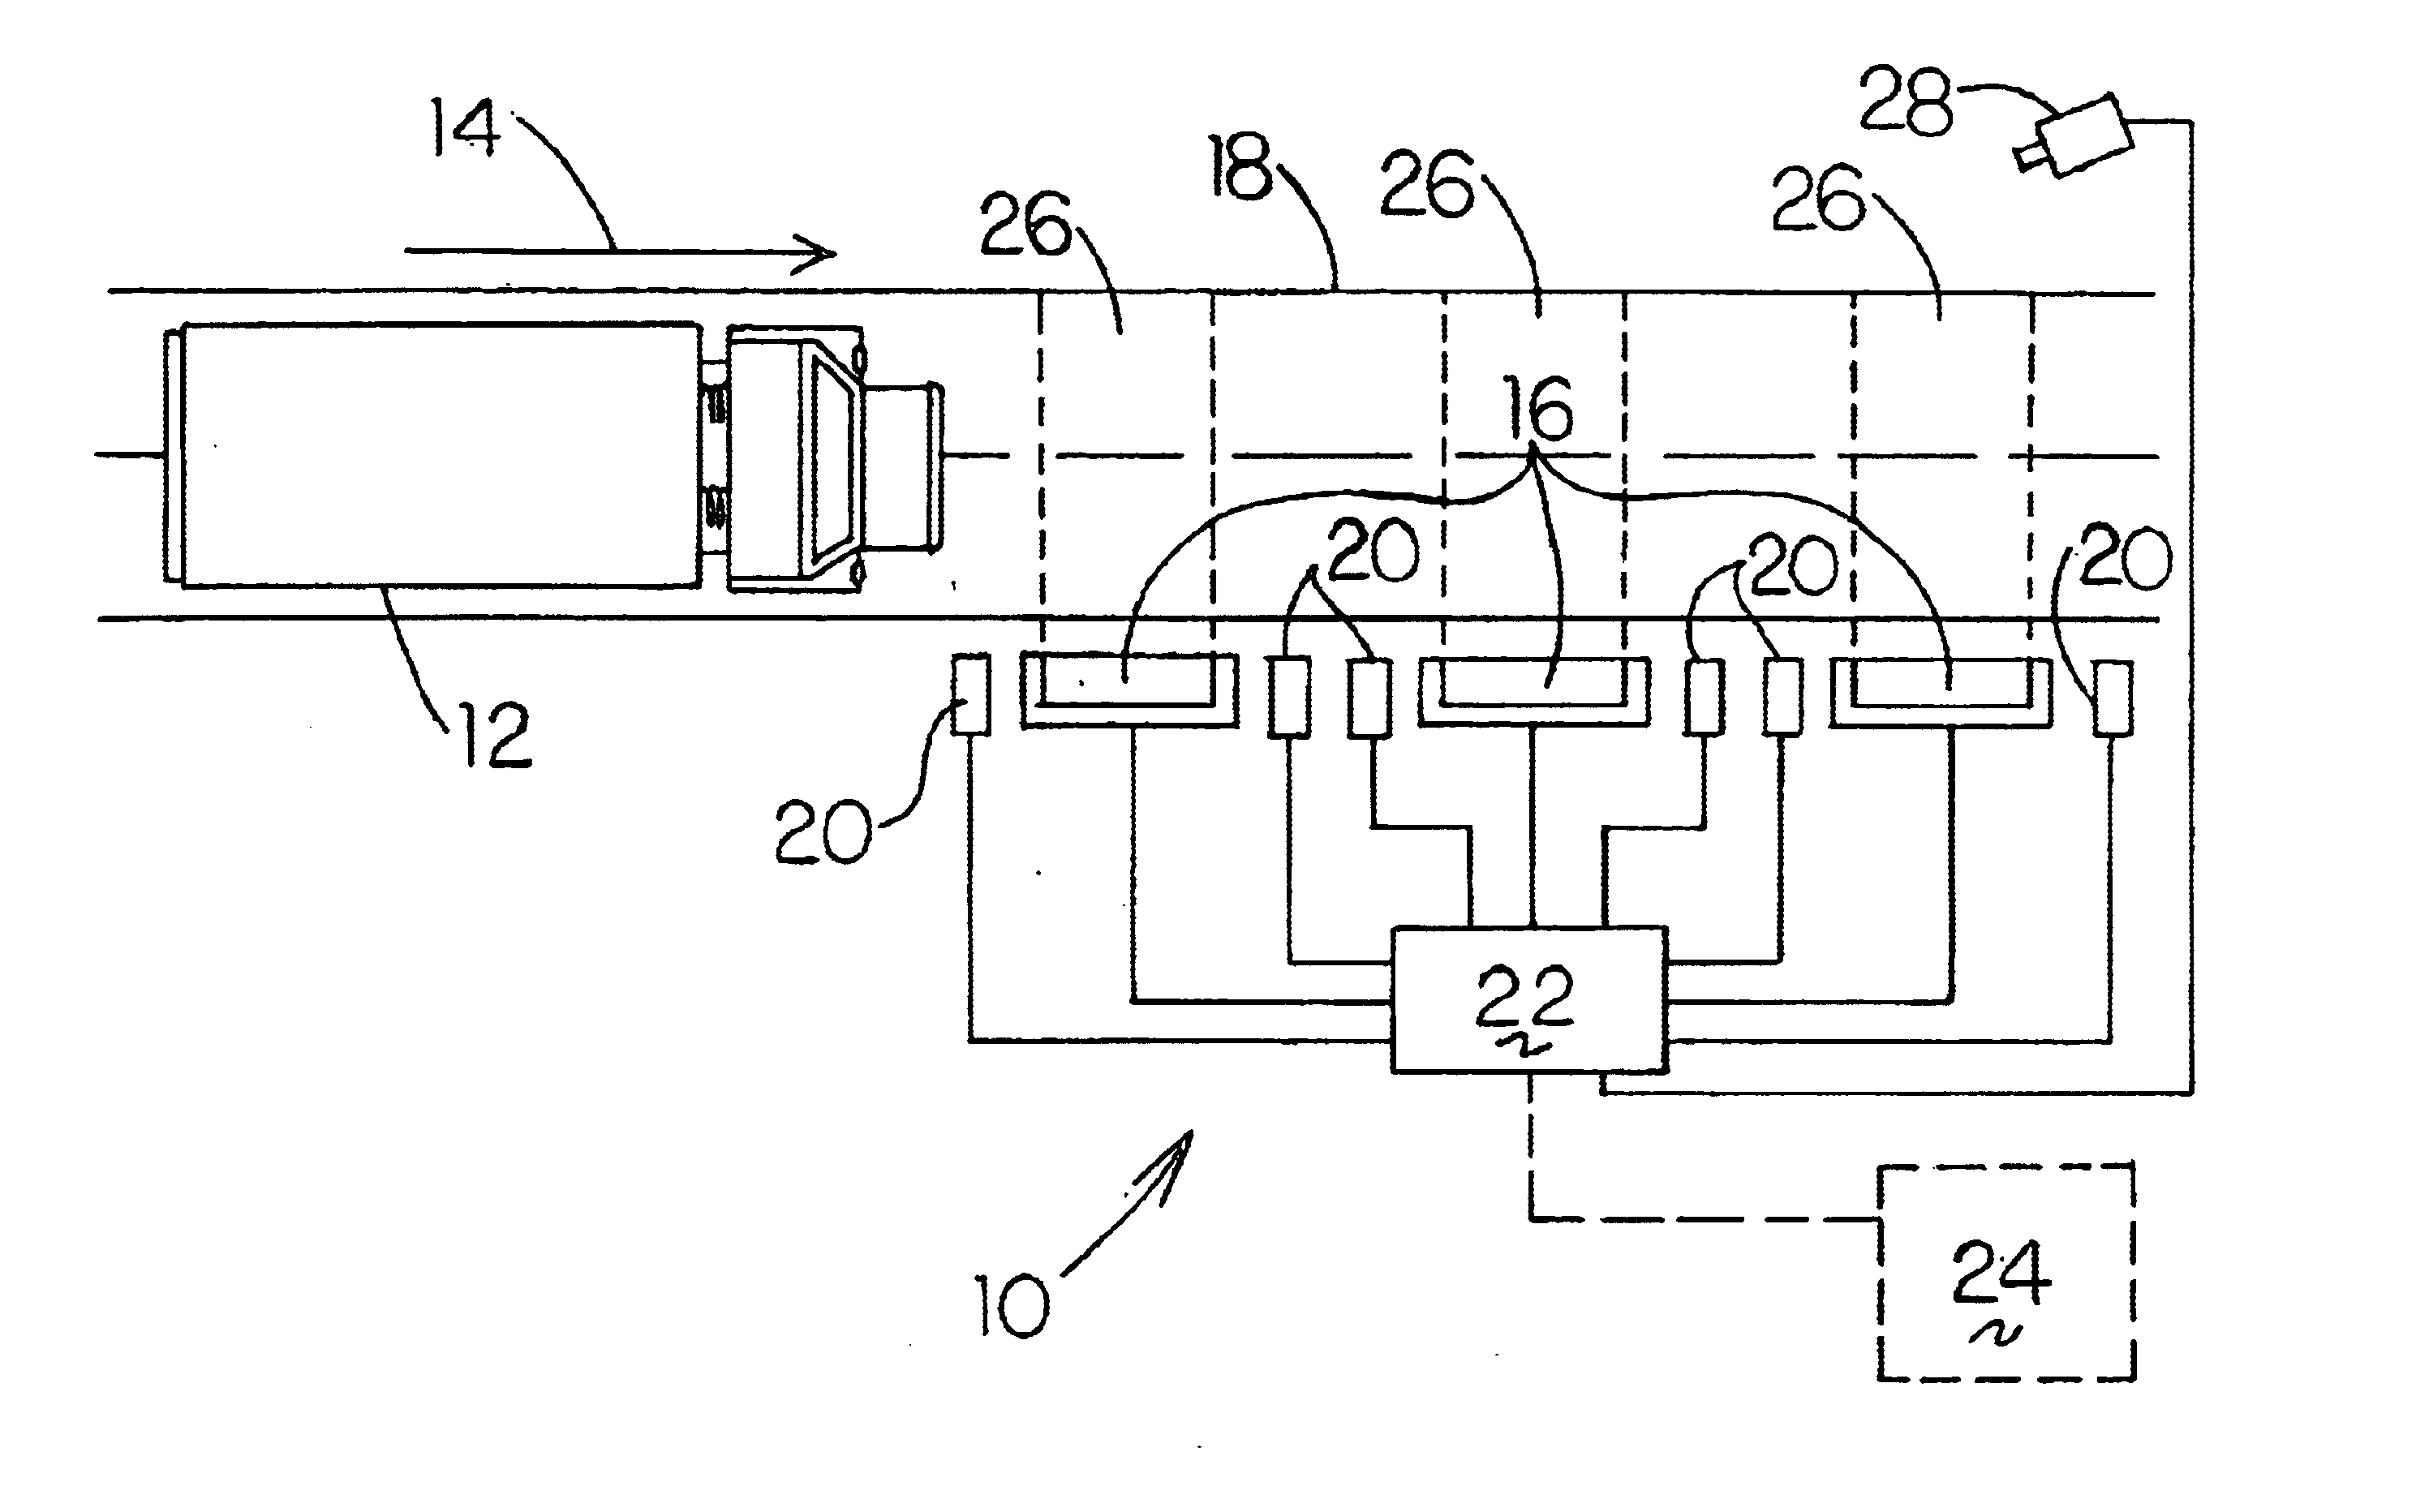 Method and apparatus for a radiation monitoring system